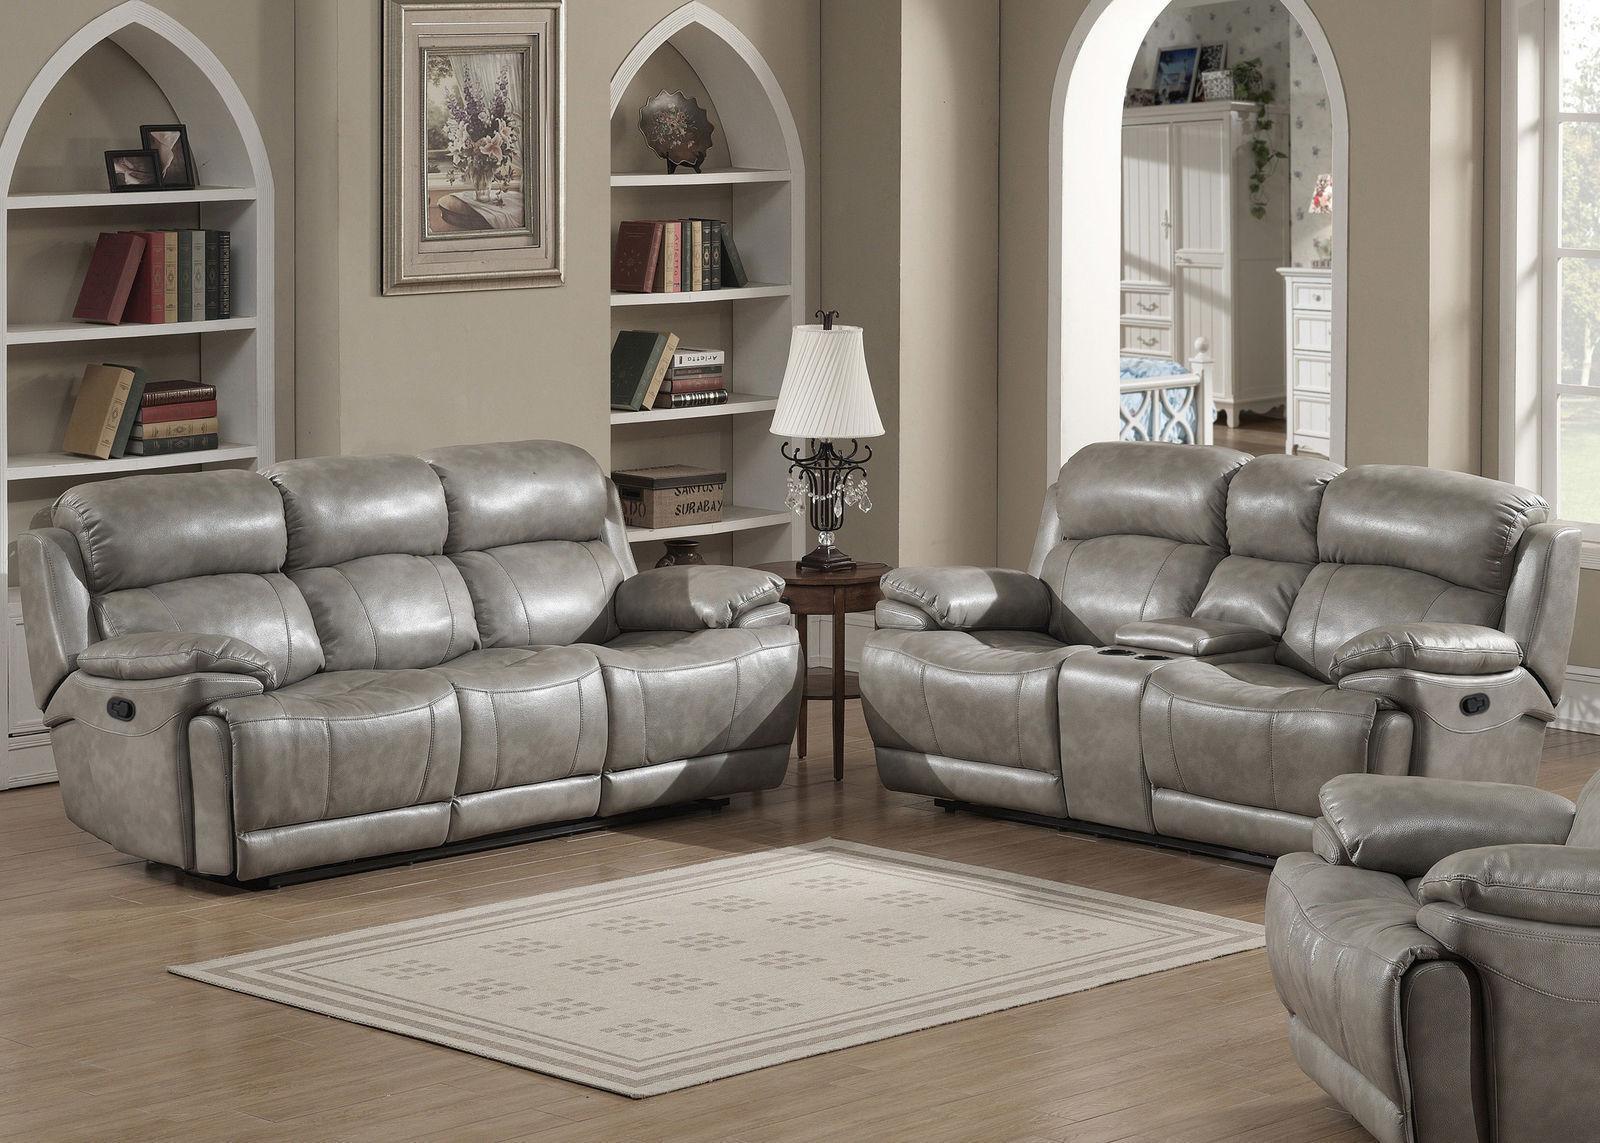 Tufted Gray Leather Living Room Chairs